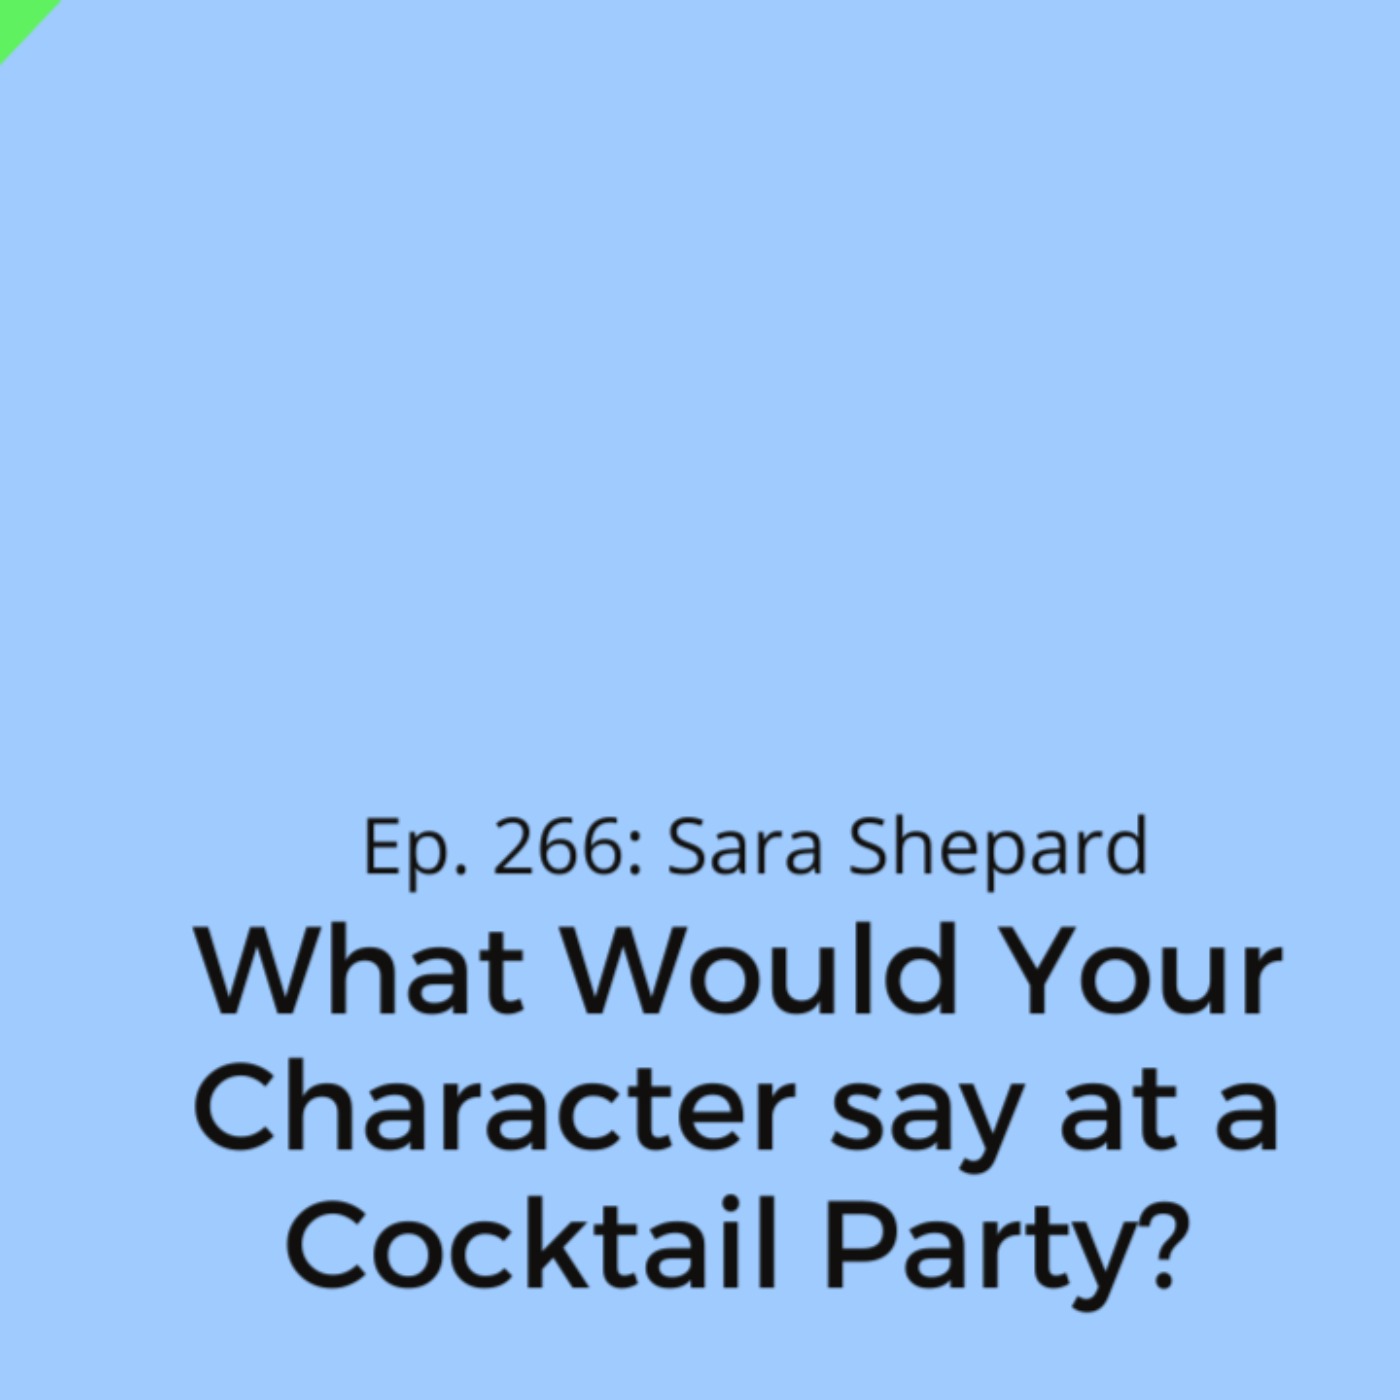 Ep. 266: Sara Shepard on What Your Characters Might Say at a Cocktail Party